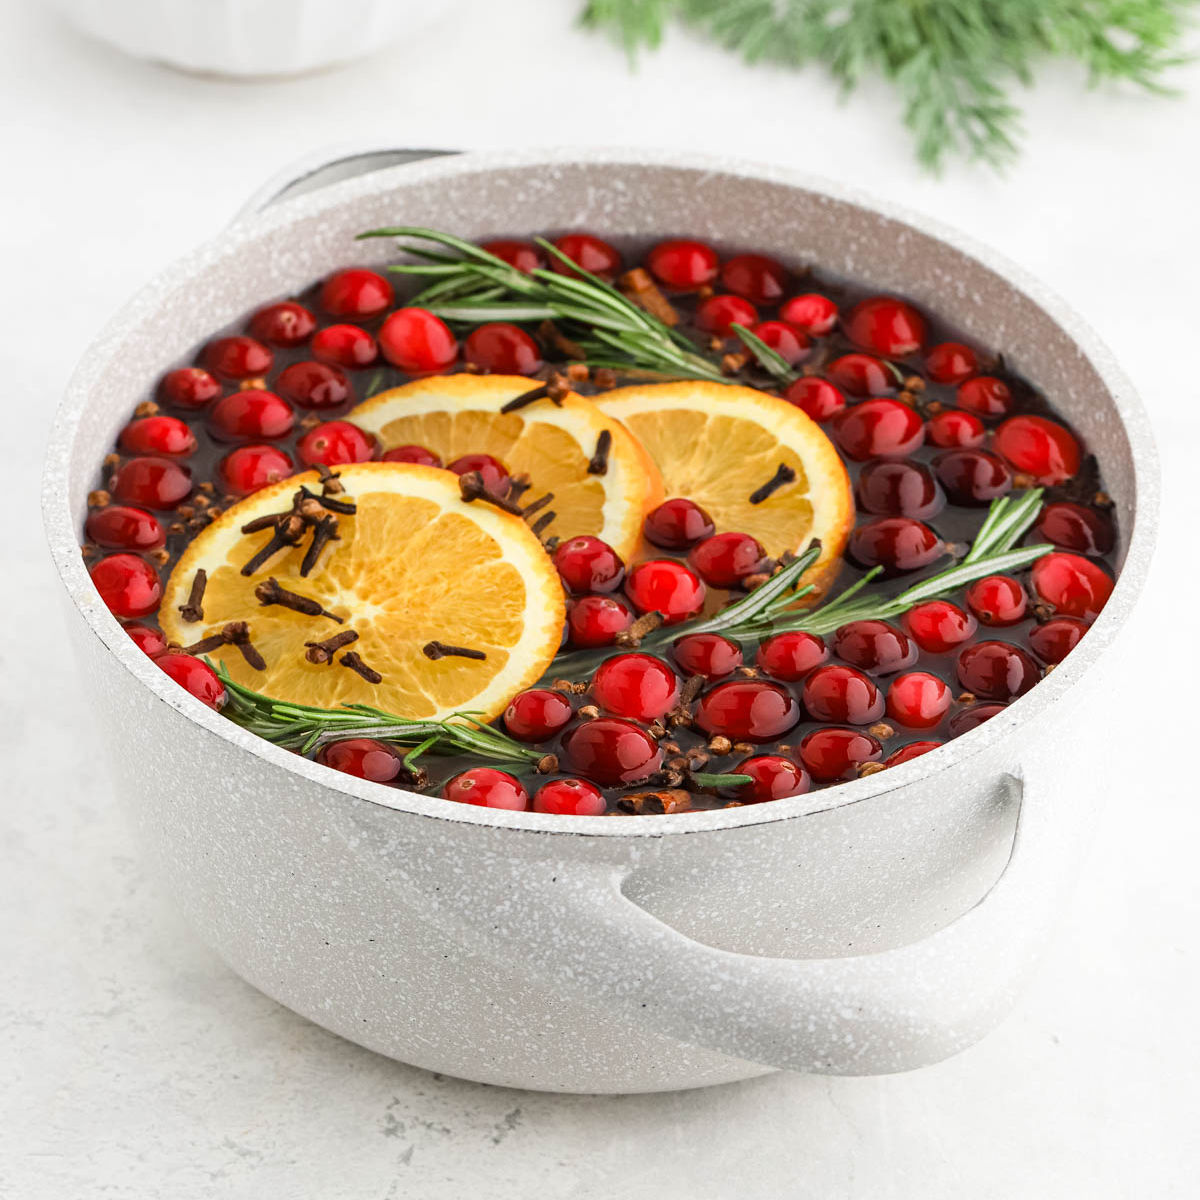 Holiday Stovetop Potpourri Recipe: The Smell of the Season